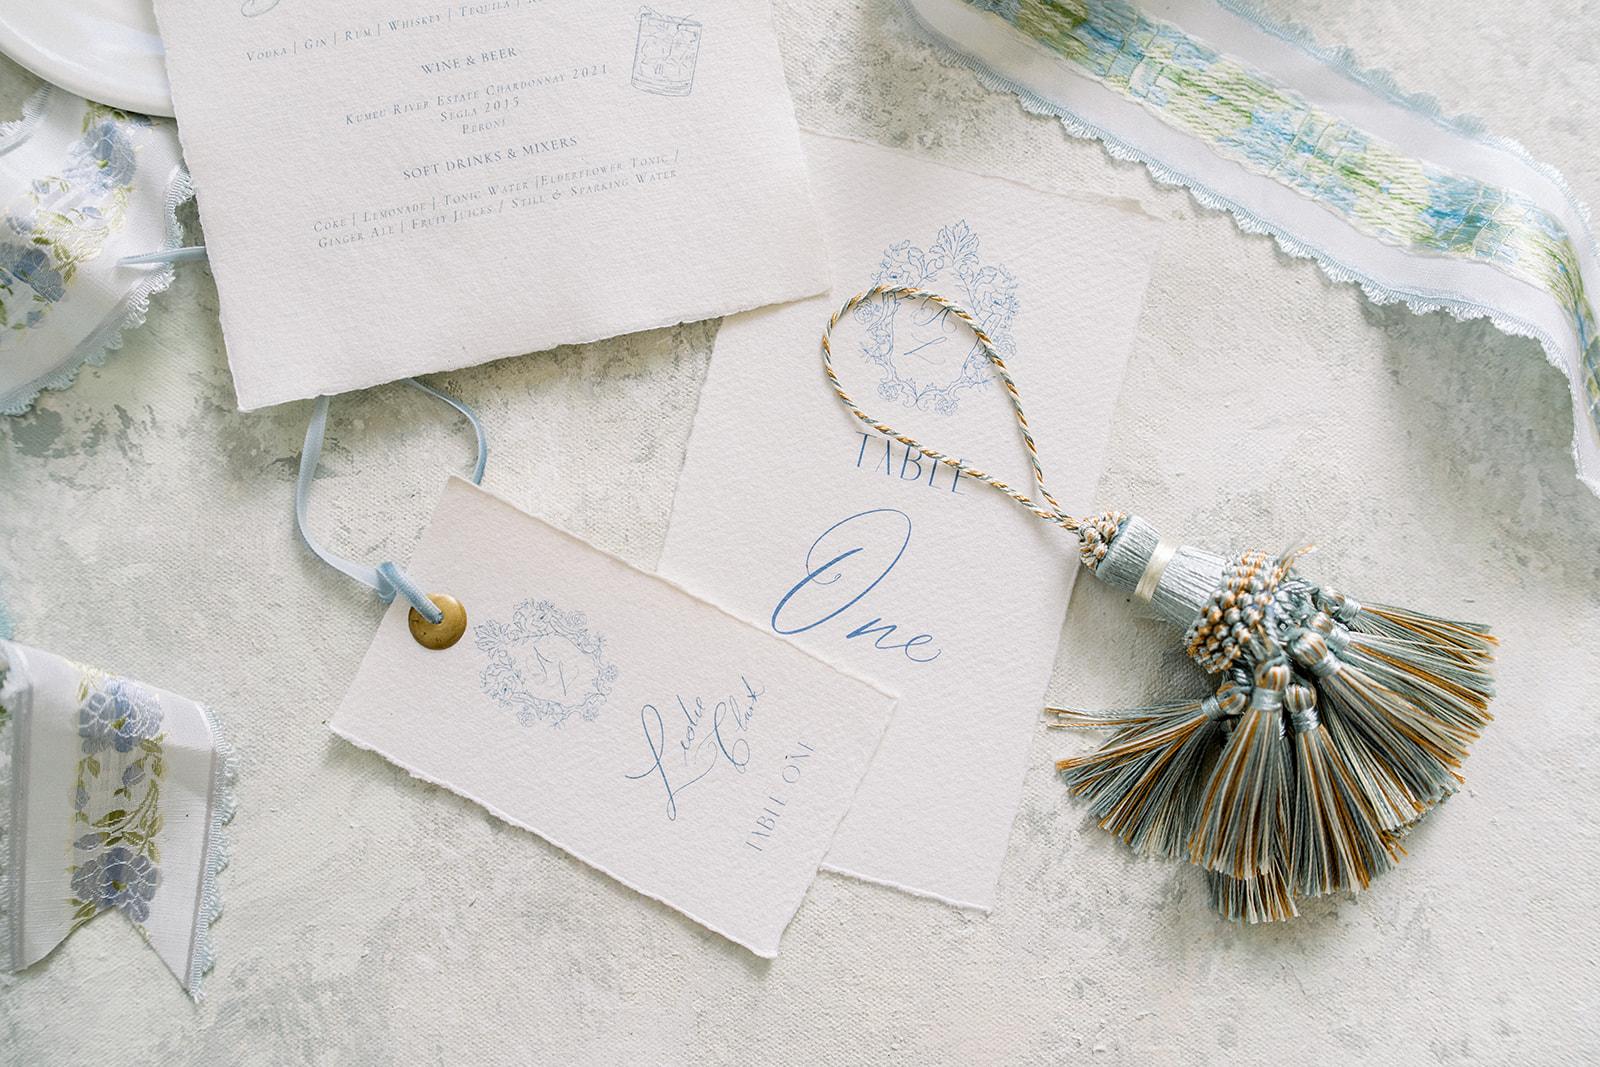 Stylish flat lay of wedding invitations and accessories, including Edera jewelry and a chic blue ring box from The Styli